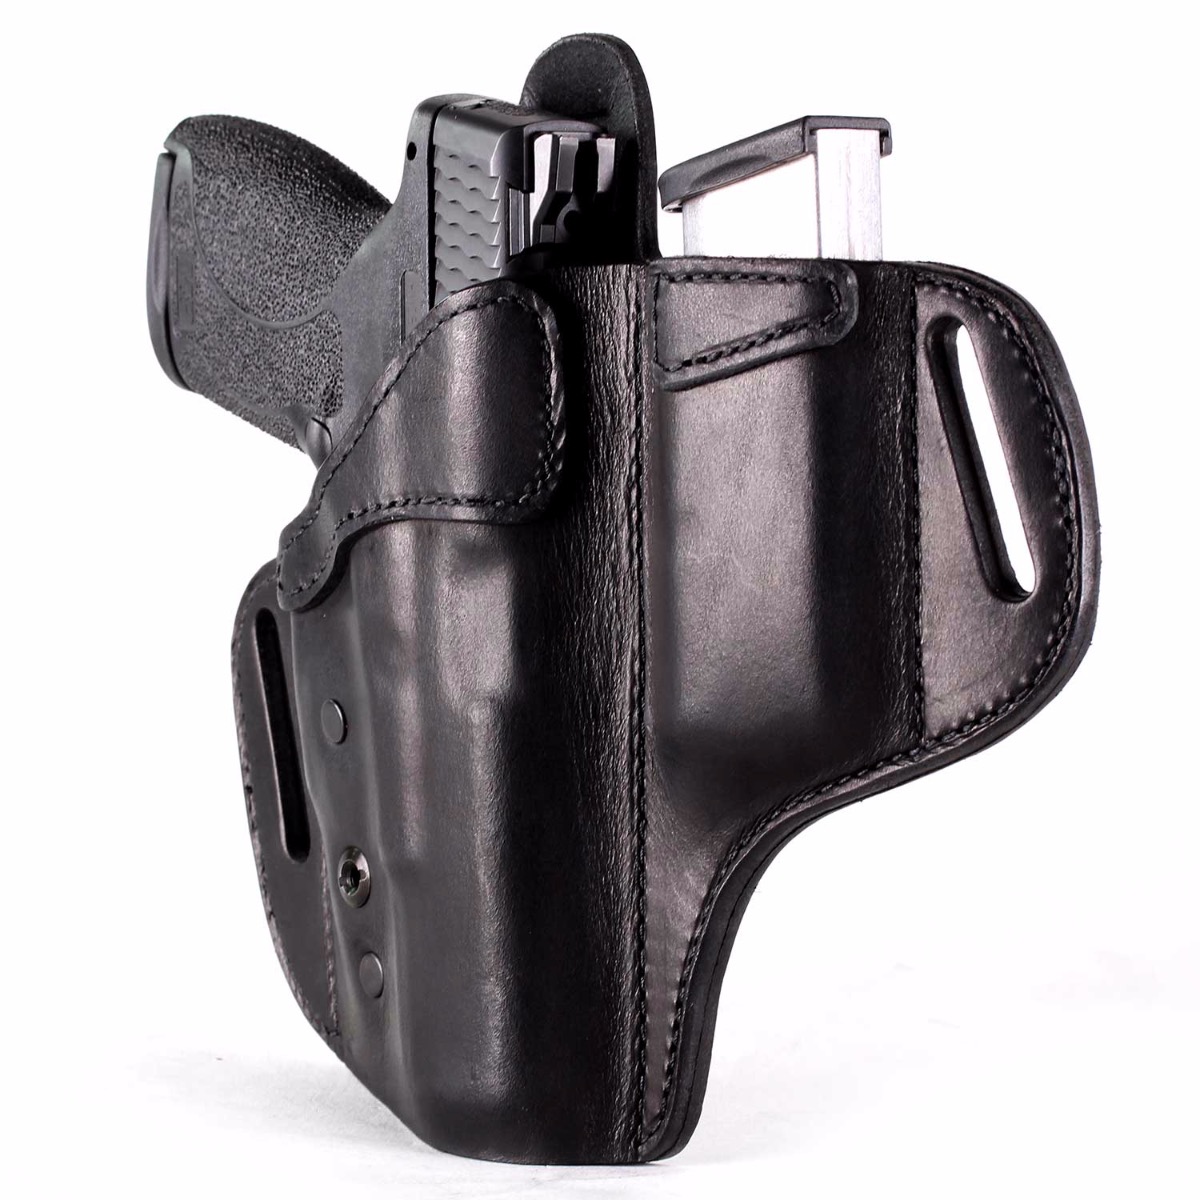 OWB Universal Leather Magazine Pouch w/Snap Holster Fits  9mm .40 calibers 